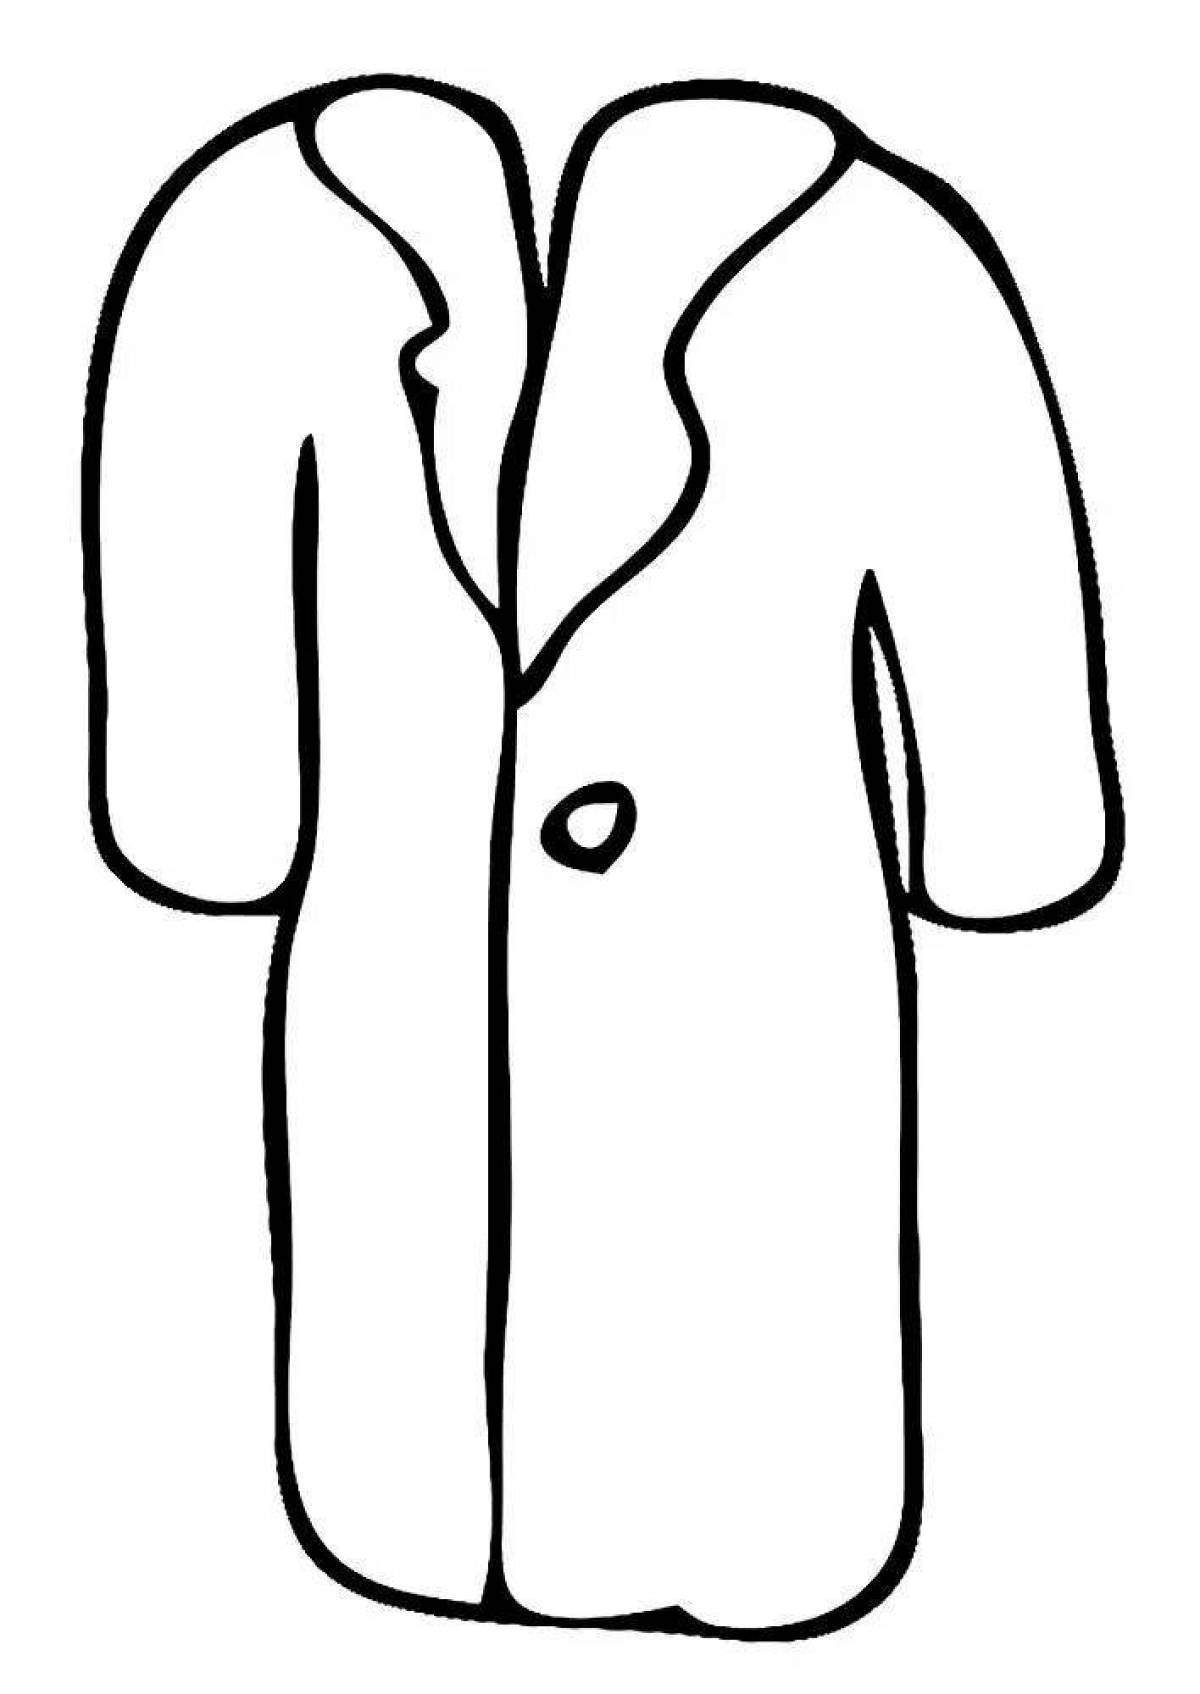 Outstanding coat coloring page for kids